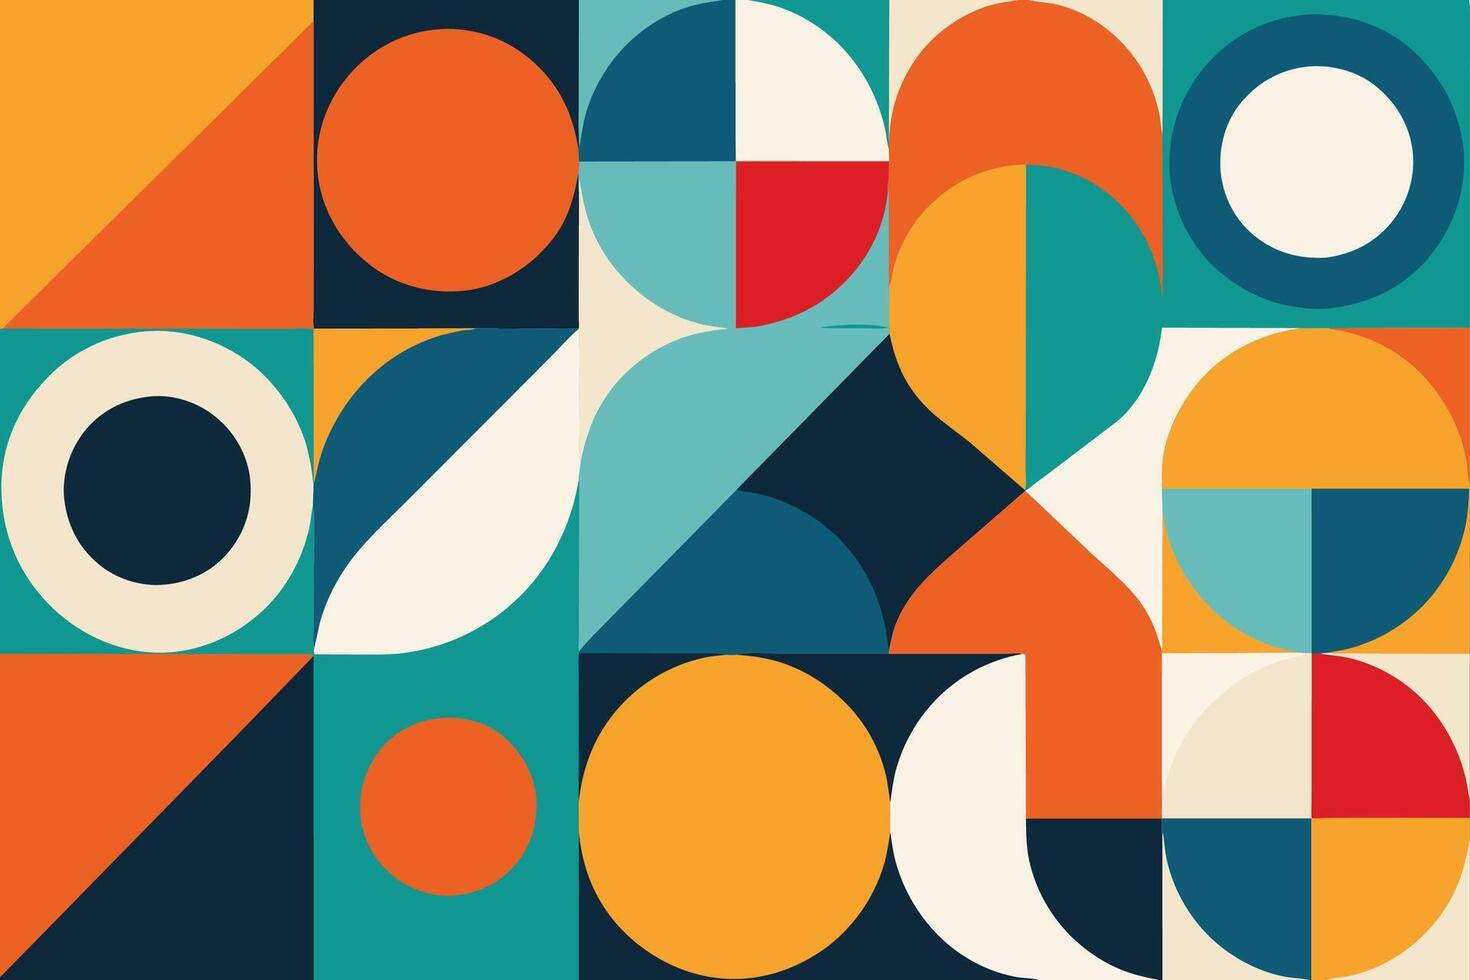 geometric pattern element in mid-century style. Retro abstract collection of colorful circle, curve, square and triangle shapes. Modern trendy design for cover, business card, poster, wall art vector